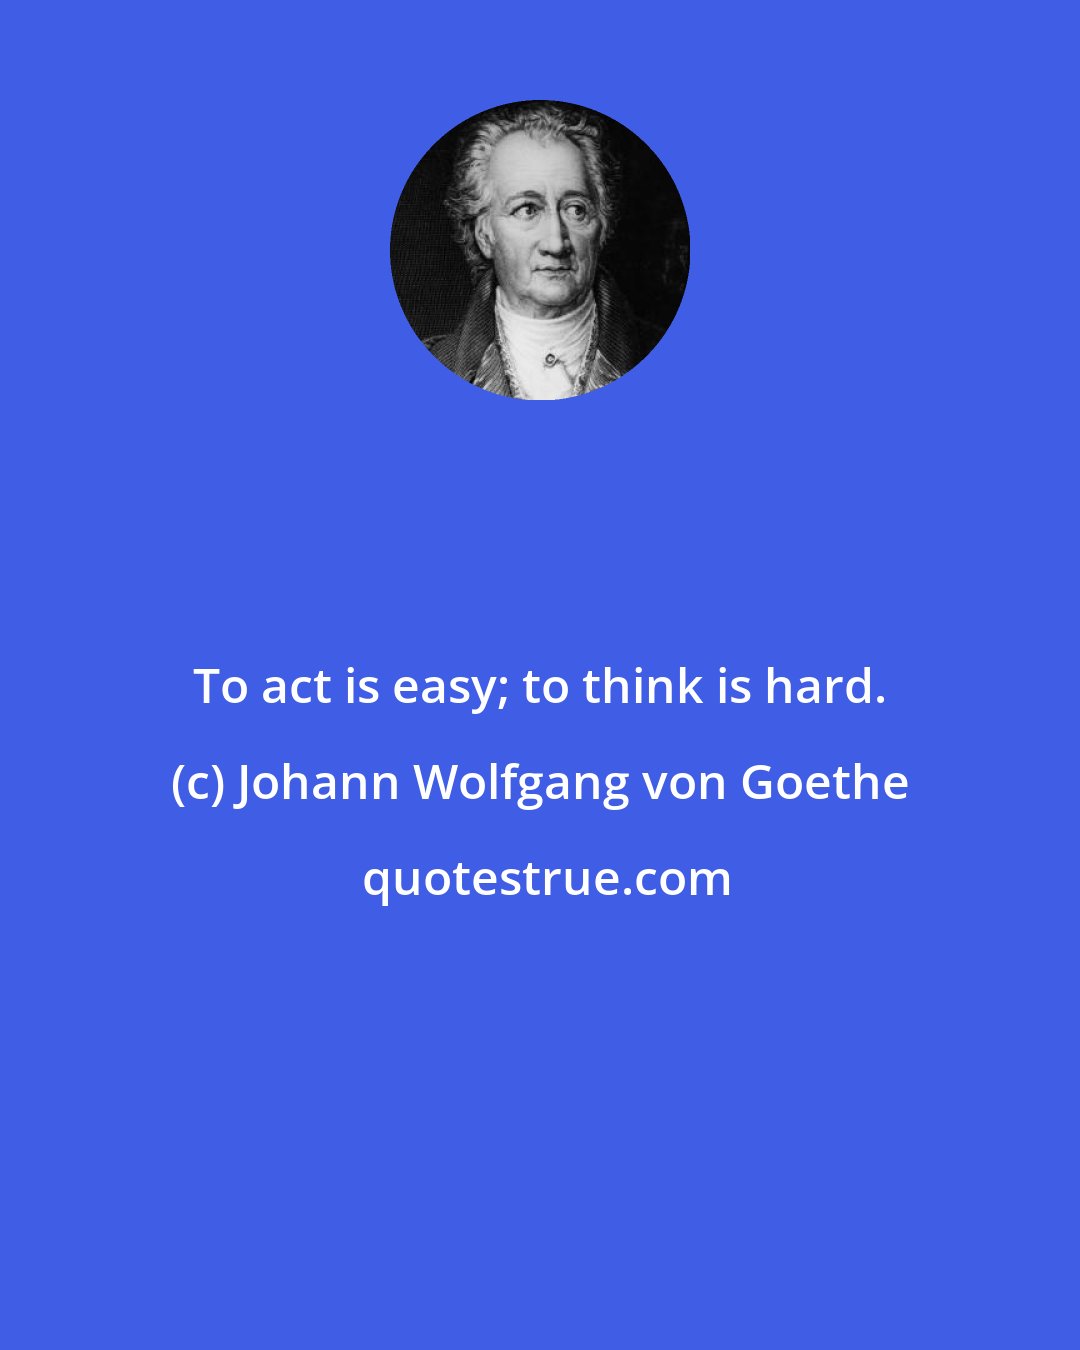 Johann Wolfgang von Goethe: To act is easy; to think is hard.